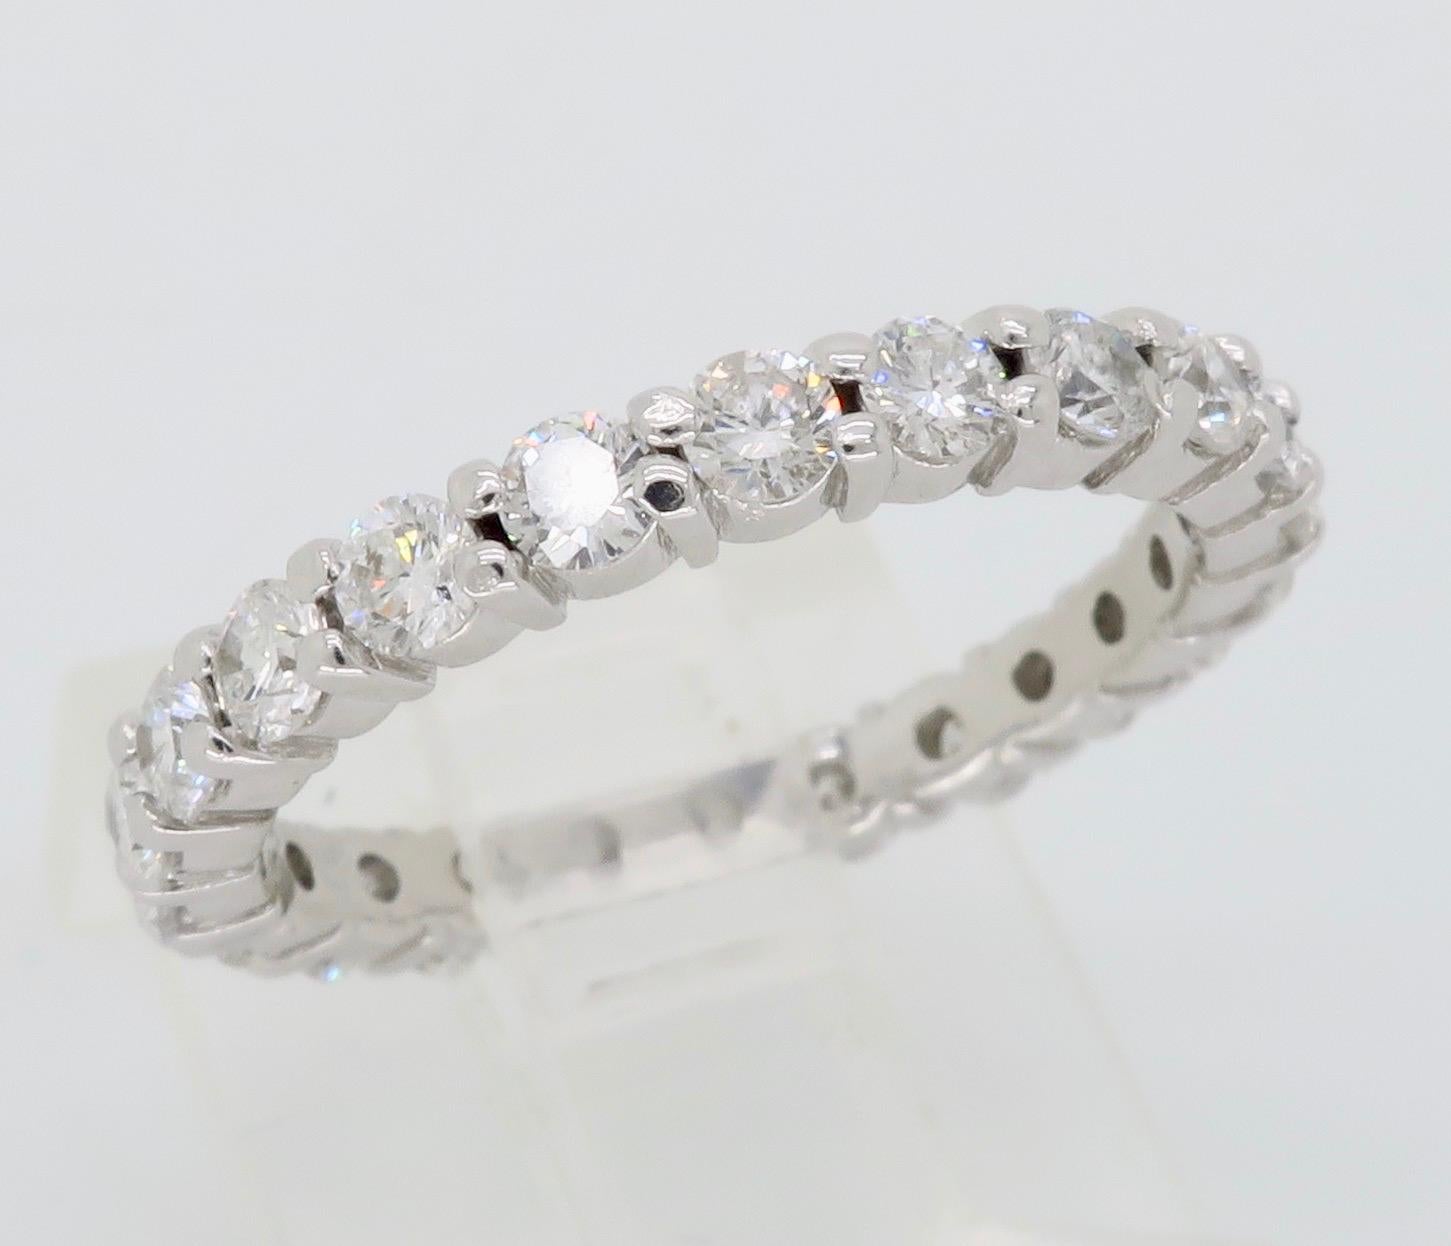 Perfect diamond eternity band made in 14k White Gold.

Diamond Carat Weight: Approximately 1.00CTW
Diamond Cut: Round Brilliant Cut Diamonds
Color: Average F-H
Clarity: Average VS-SI
Metal: 14K White Gold
Marked/Tested: 14k
Weight: 2.0 Grams
Ring